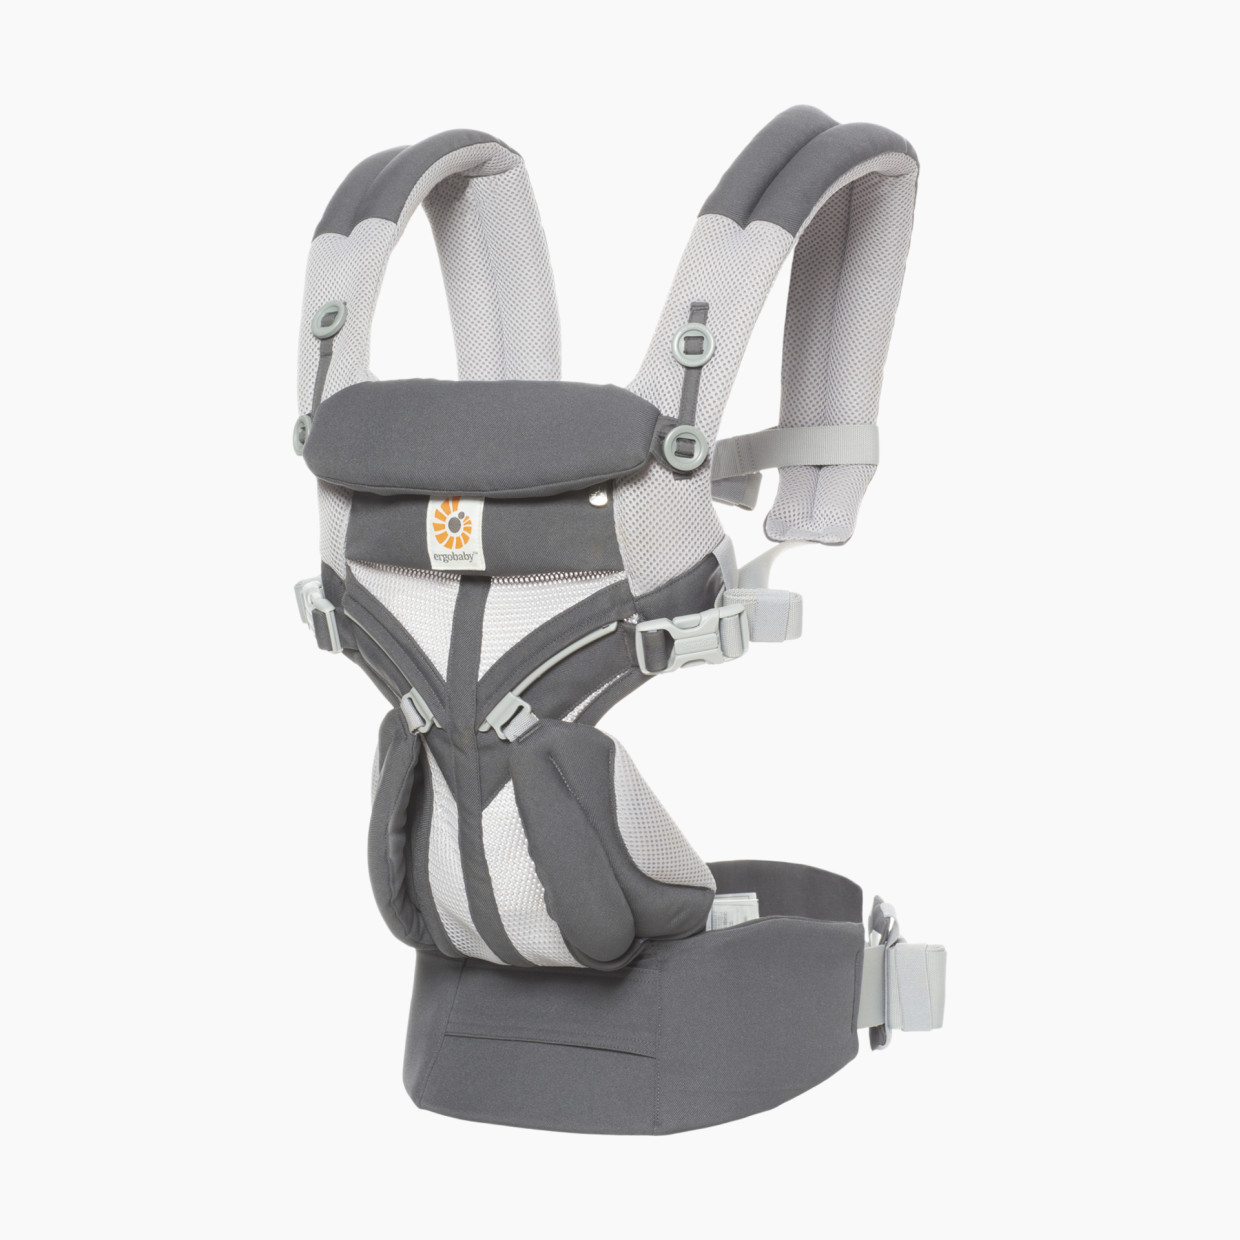 Ergobaby Omni 360 Cool Air Mesh Baby Carrier - Carbon Grey.